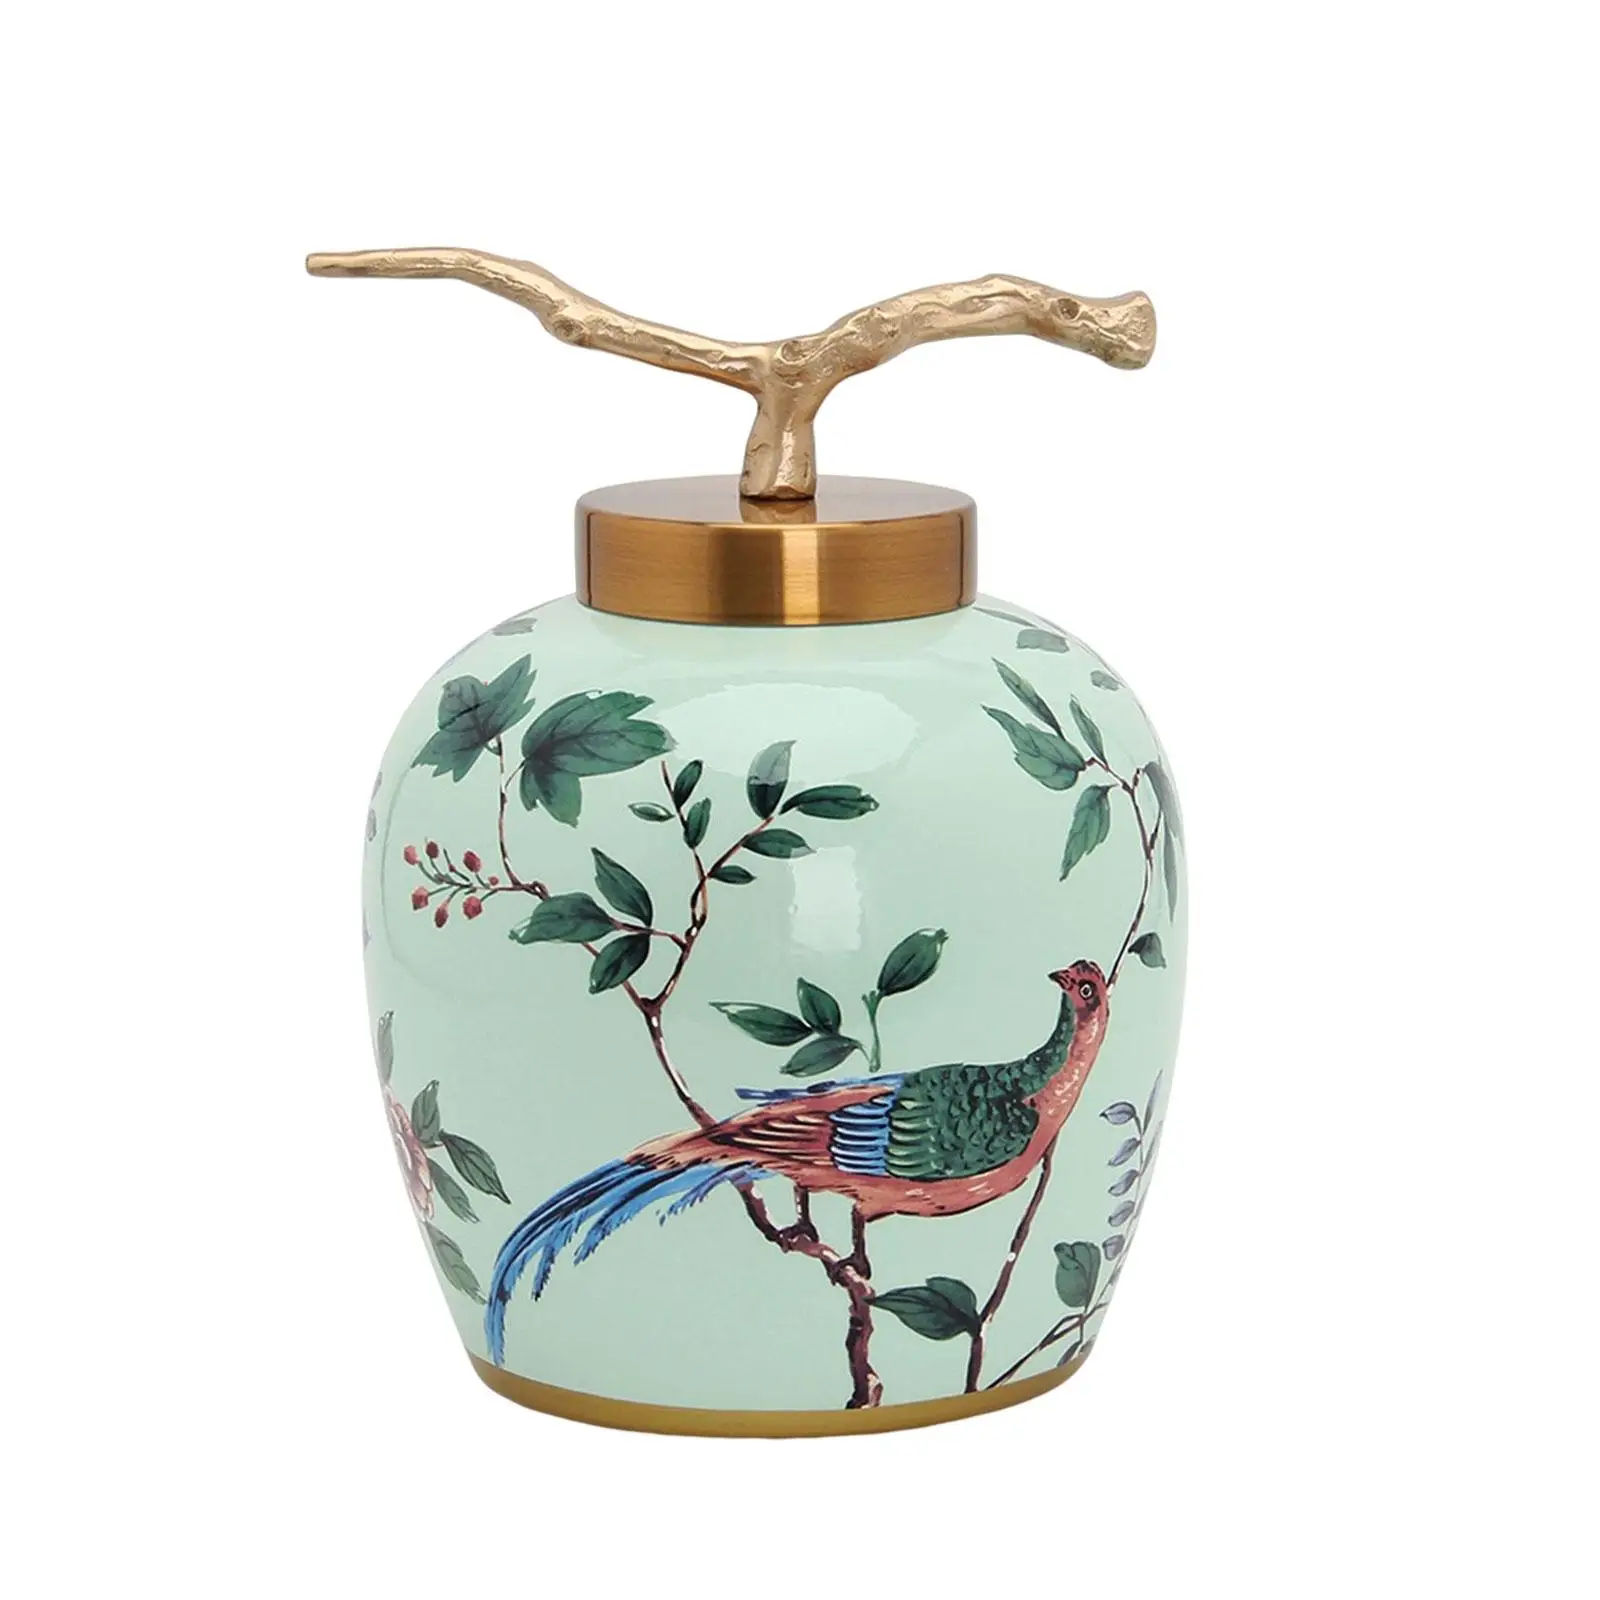 Oriental Ceramic Ginger Jar vase Gift Tea Storage Crafts with Lid Centerpiece for Office Wedding Table Decoration Party